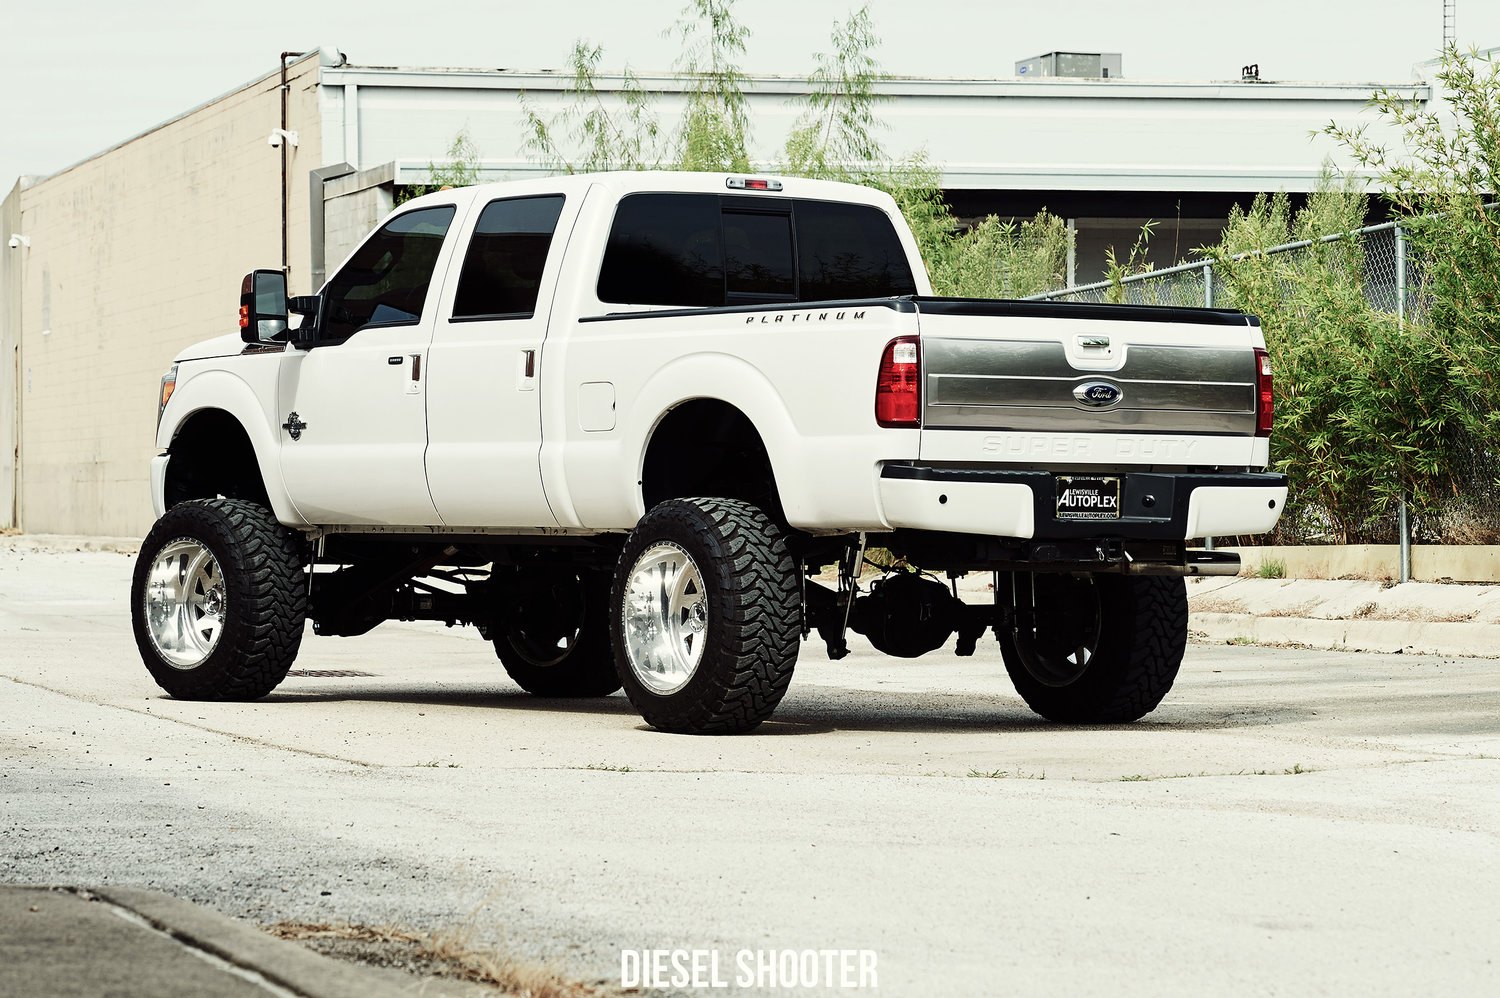 Ford F-350 Platinum with Custom Chrome Rear Bumper - Photo by Diesel Shooter